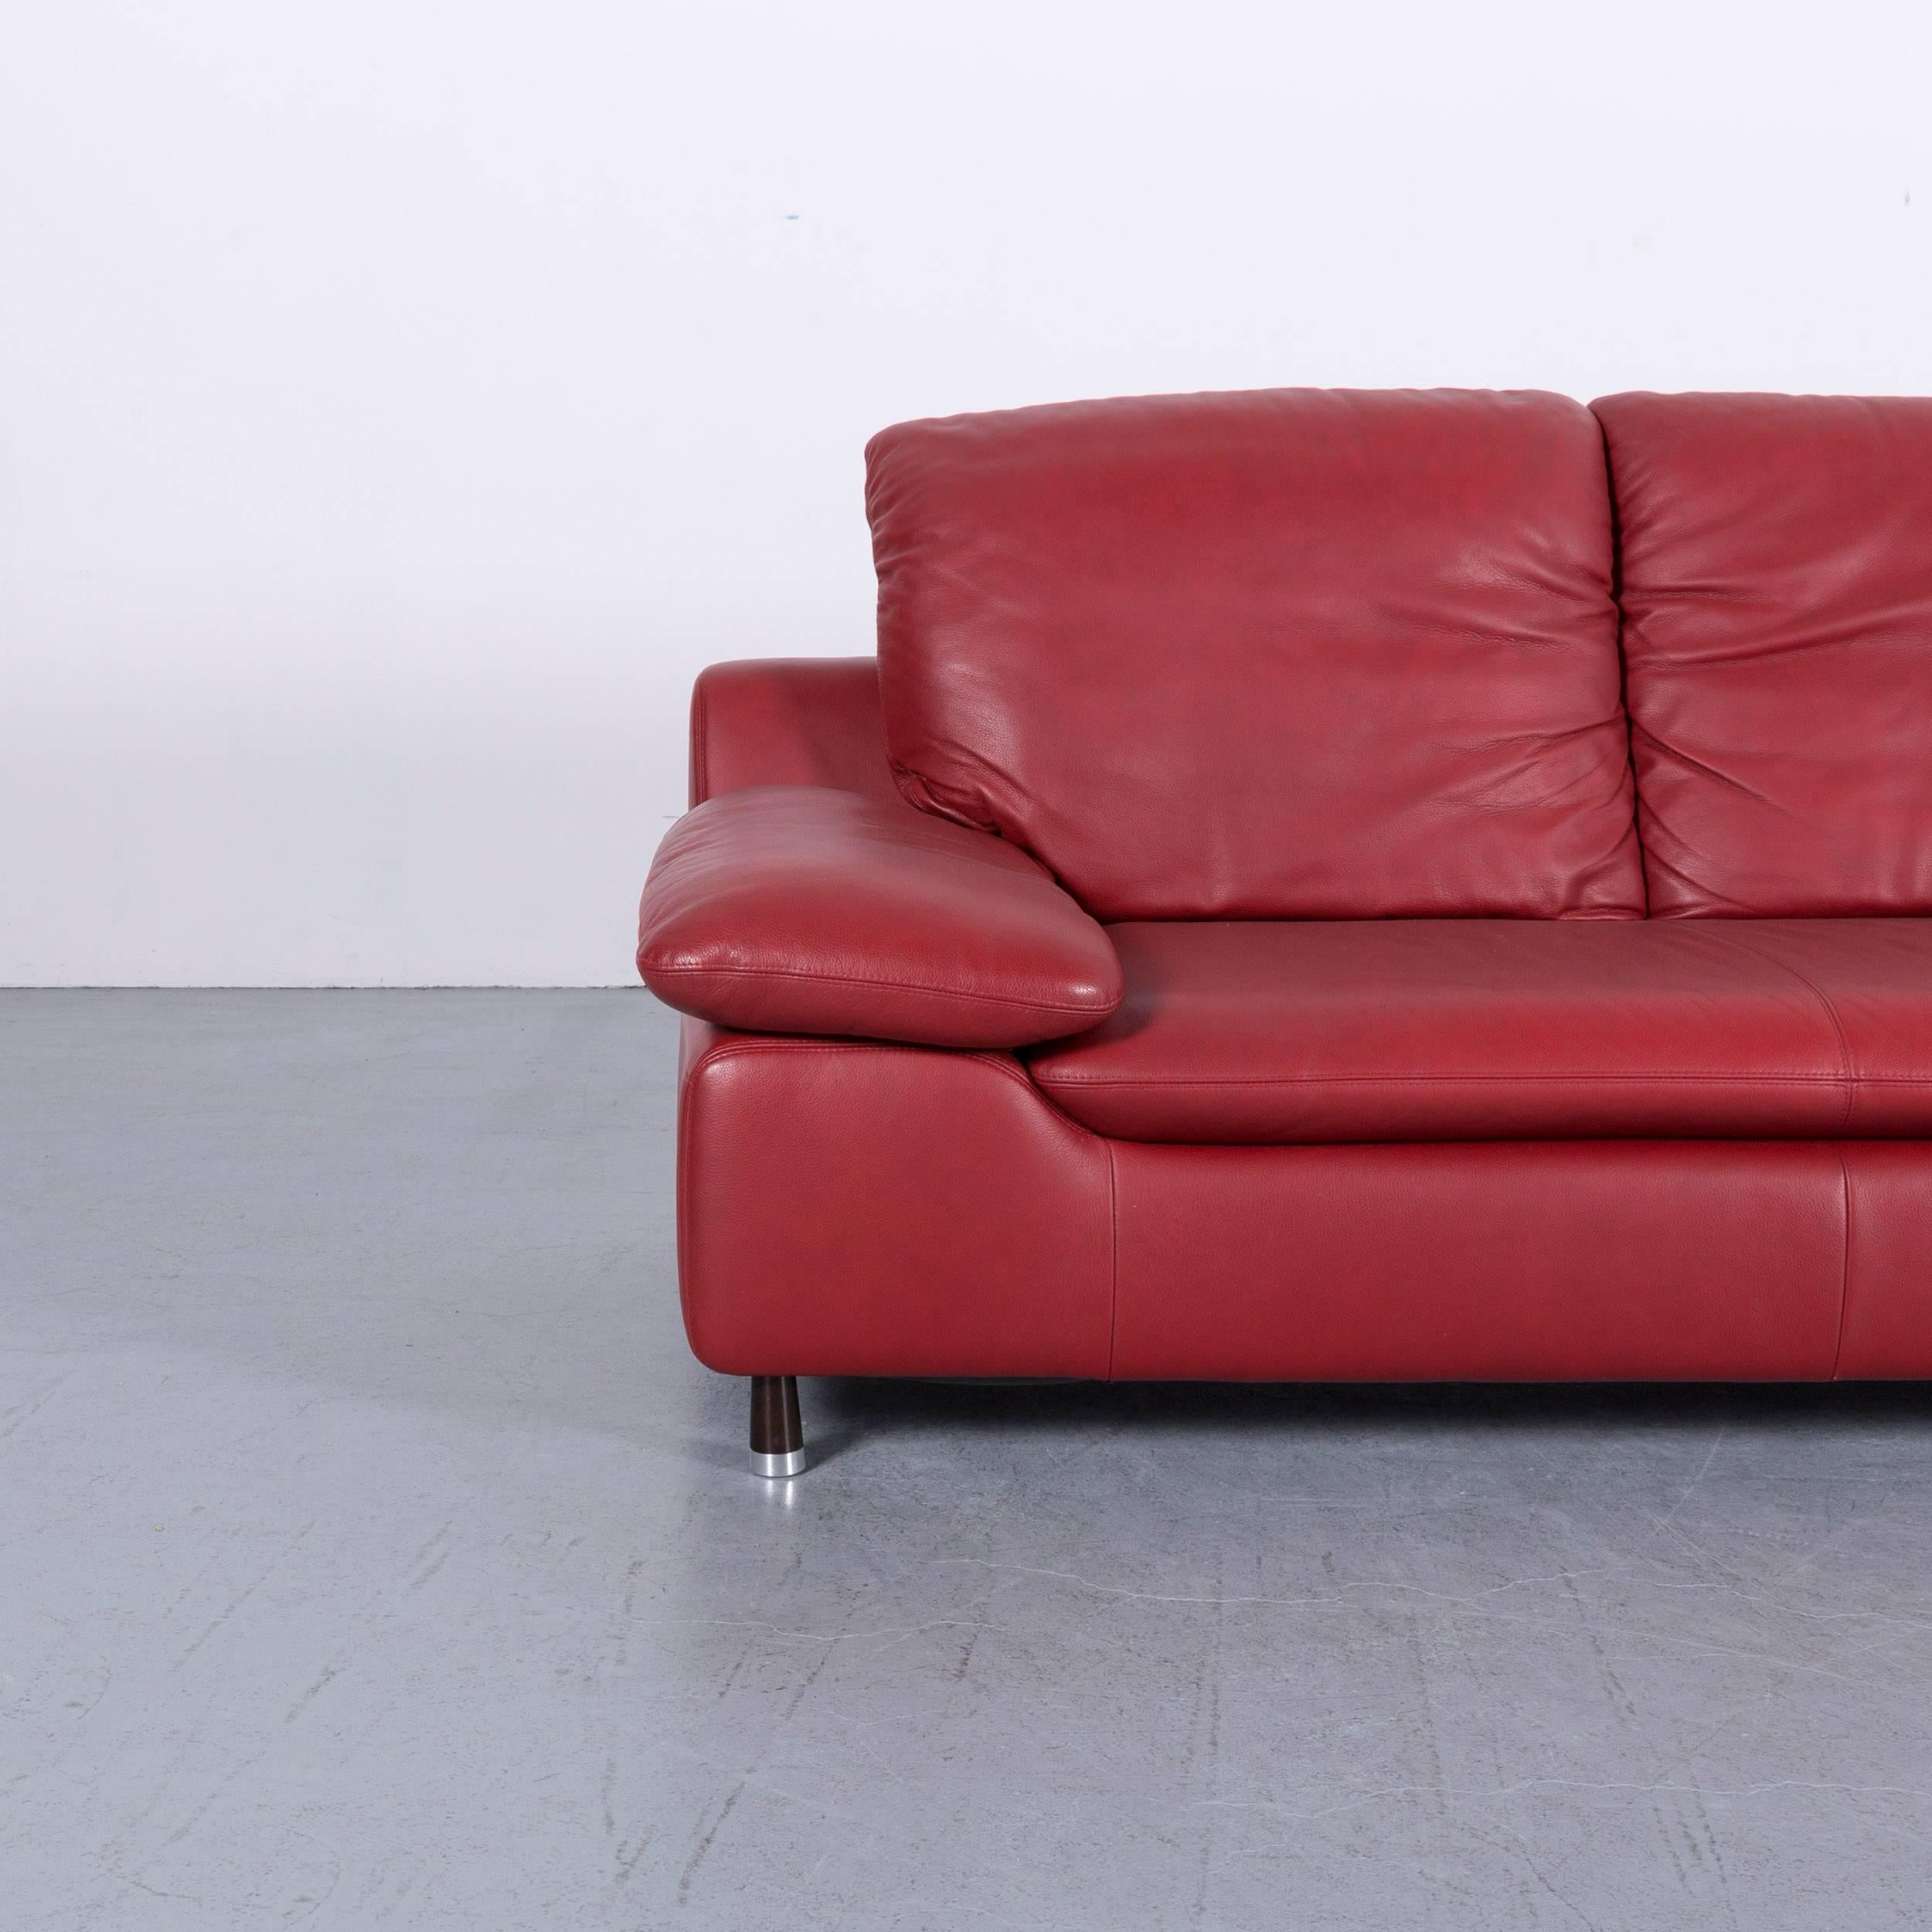 We bring to you an Willi Schillig leather sofa red two-seat couch.

































   